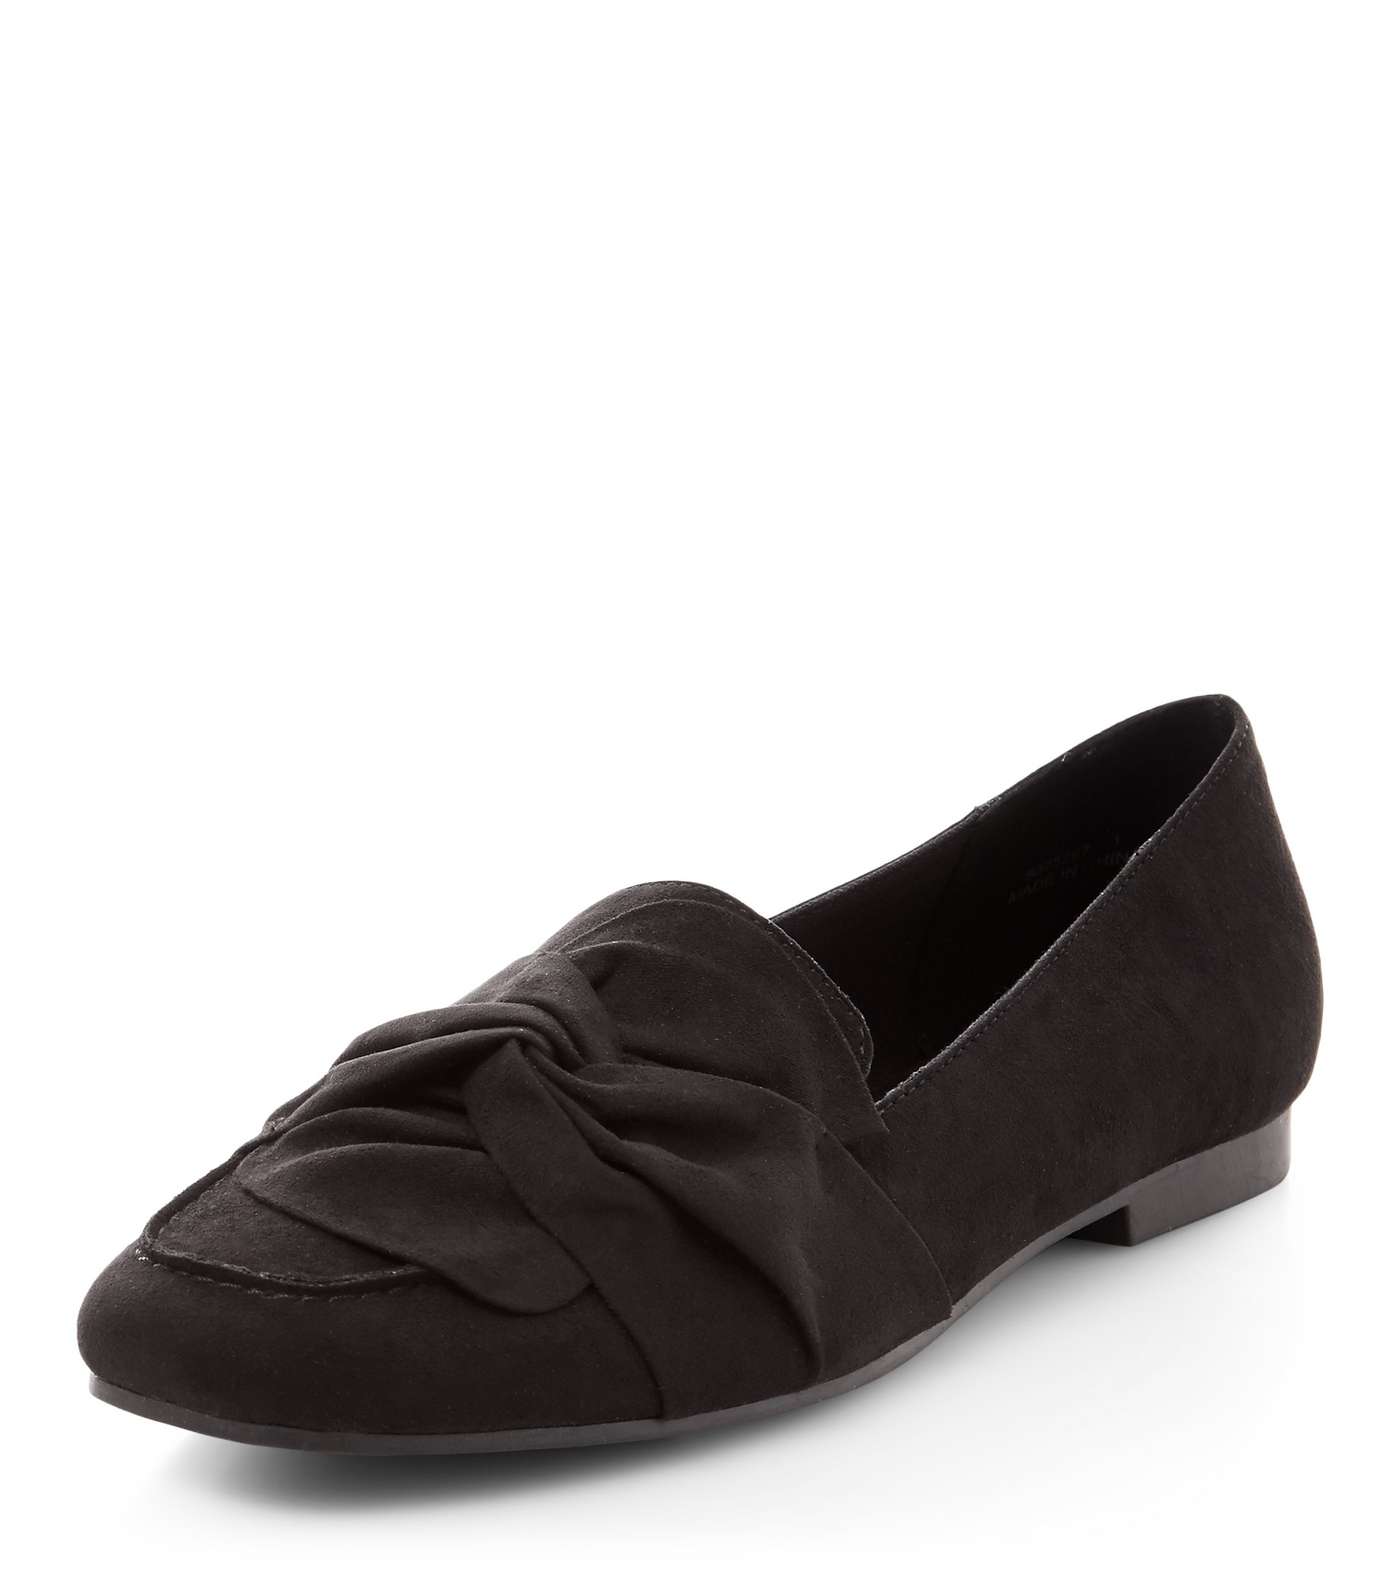 Black Suedette Knot Front Loafers Image 4